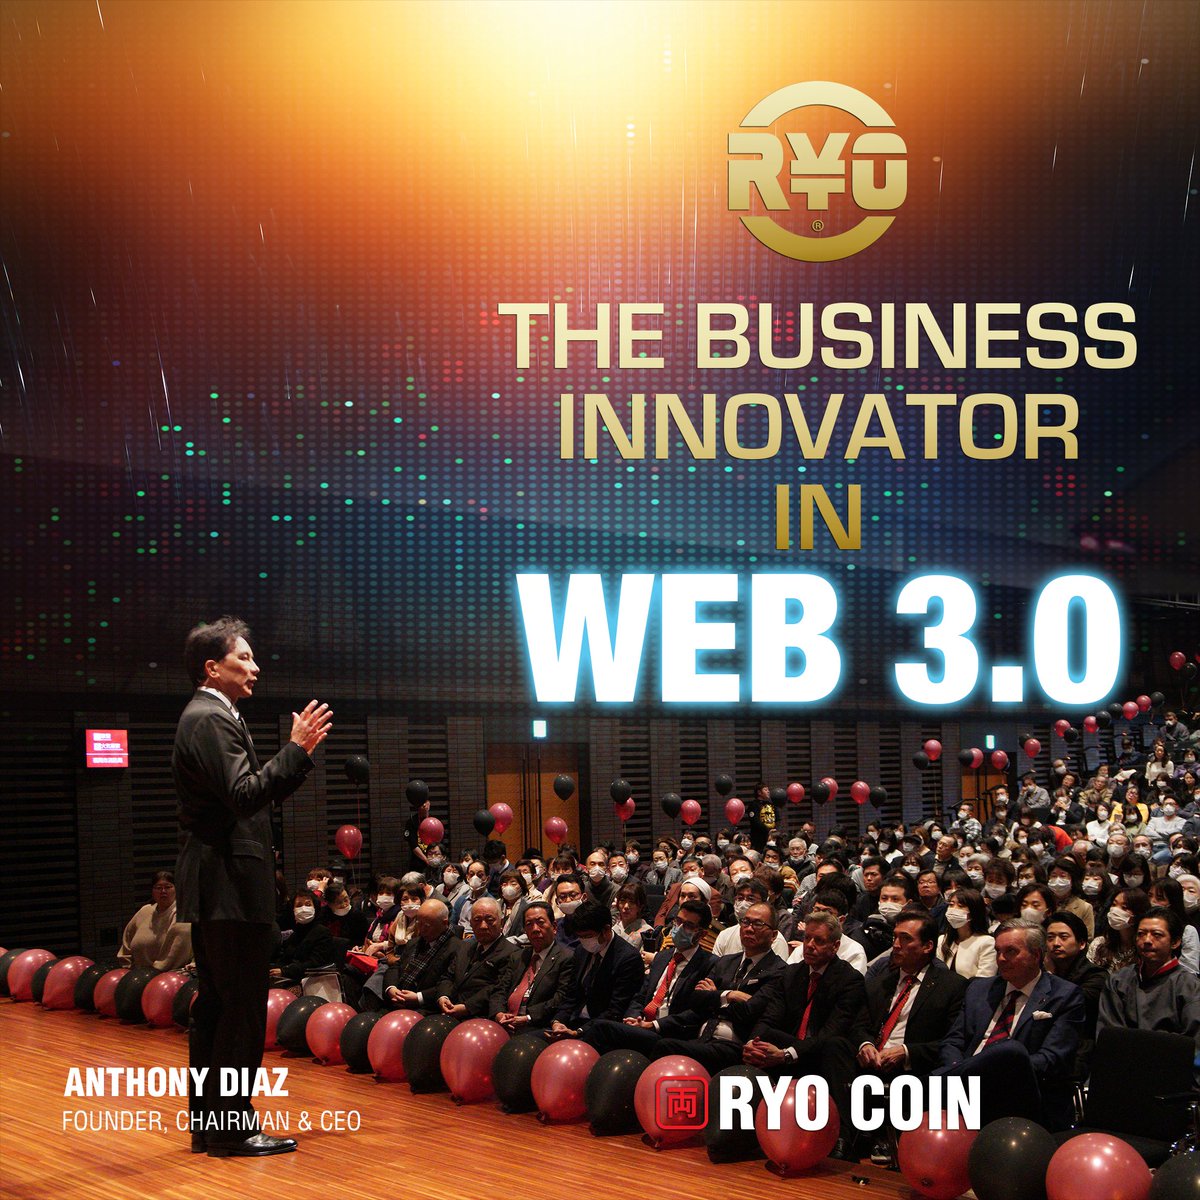 Anthony Diaz's leadership prowess and uncanny ability to see emerging technology trends before they become mainstream is key to RYO's continued success. 👏

Visit ryocoin.com for the RYO experience and subscribe today!

#RyoCryptoMadeSimple #BusinessInnovator